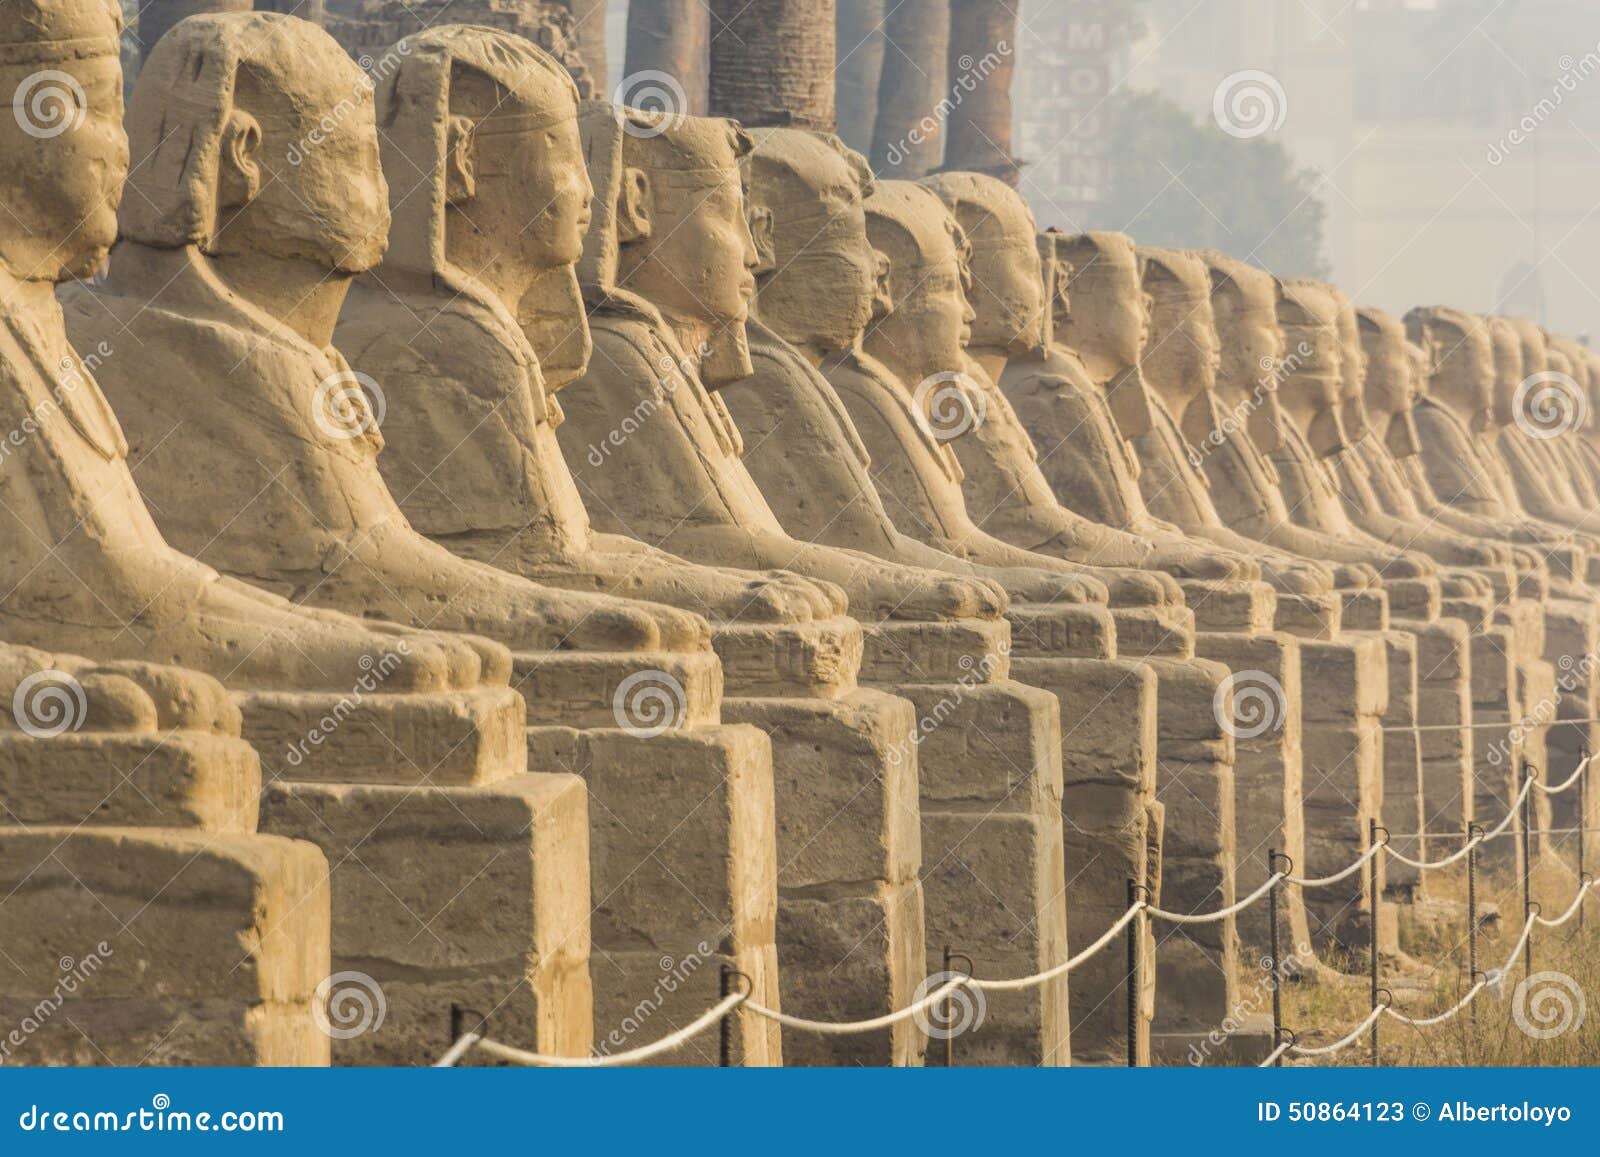 avenue of the sphinxes, luxor temple, egypt